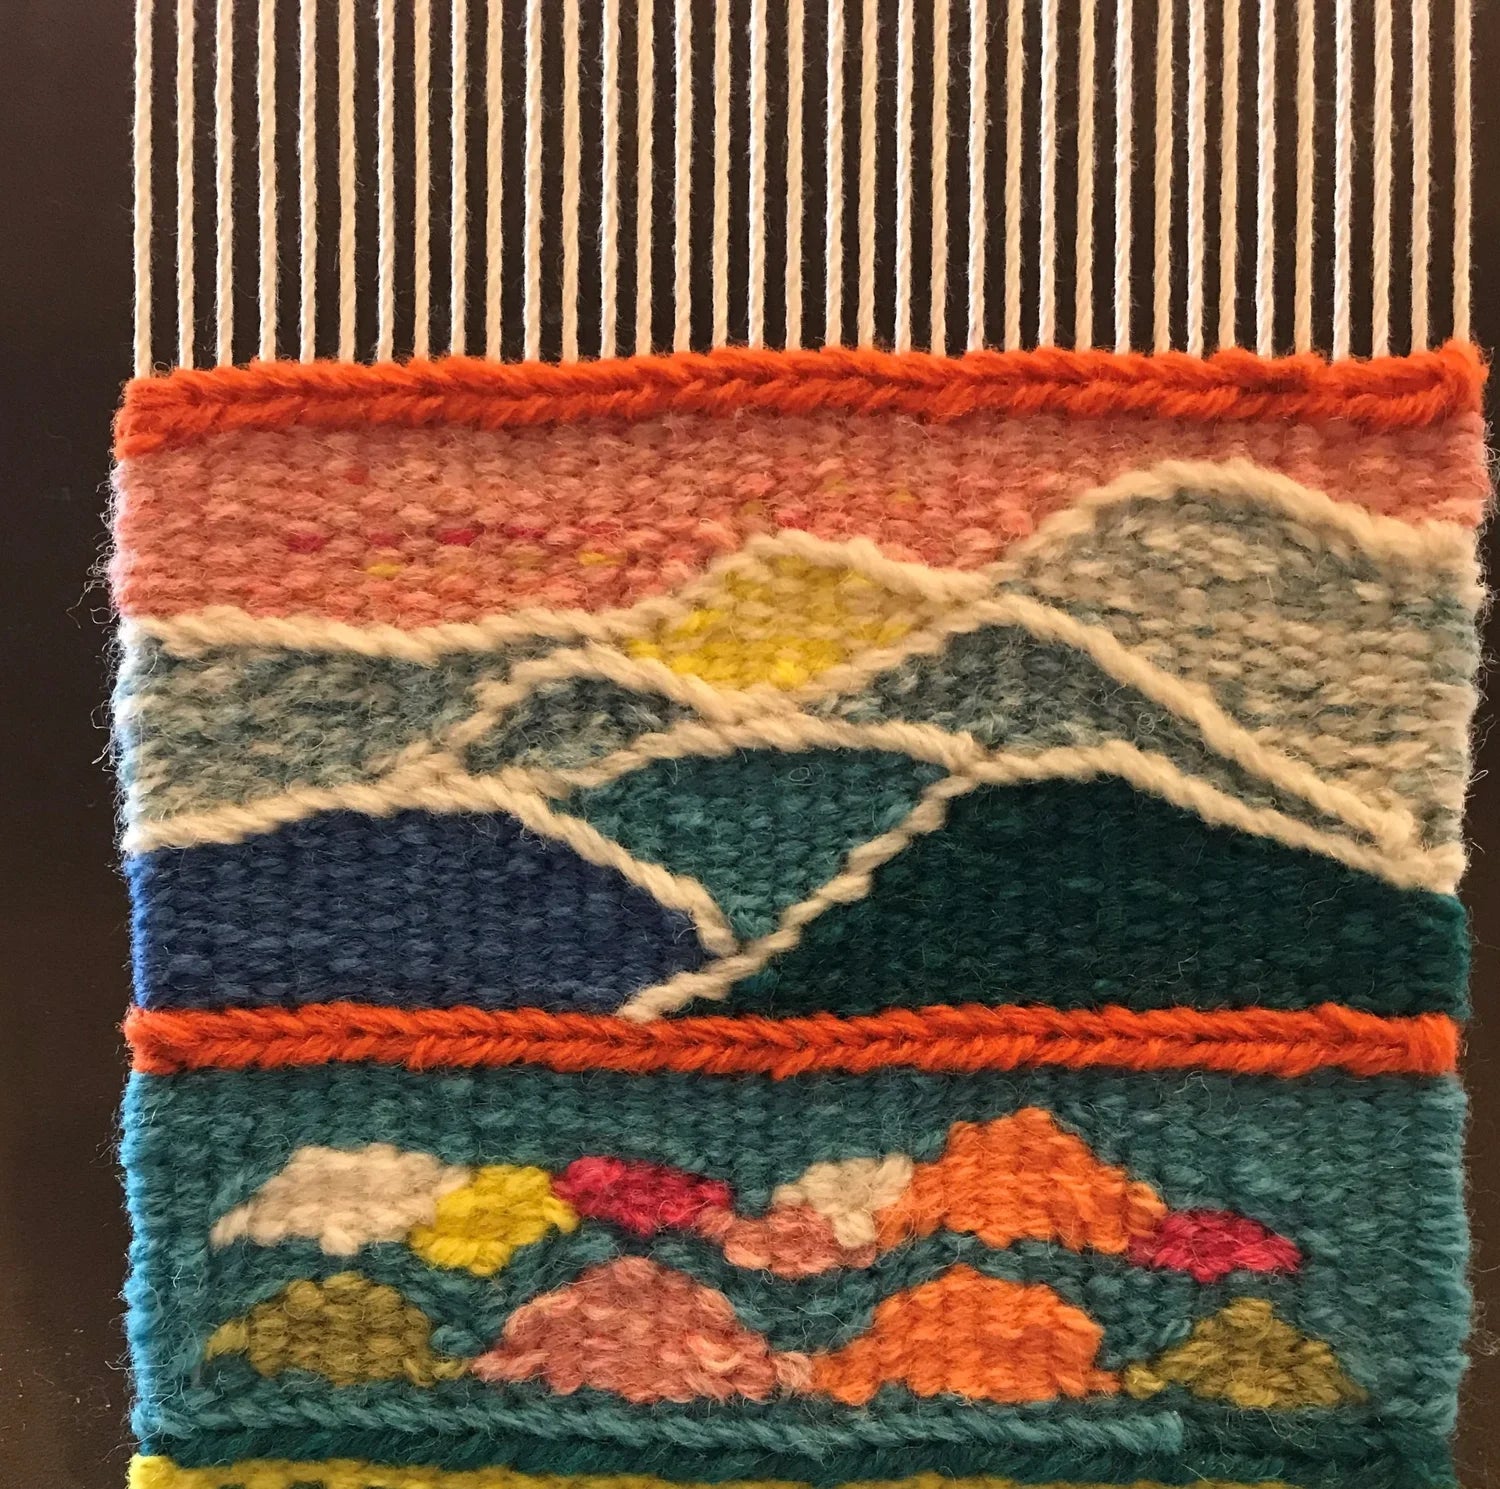 Explore Tapestry Weave-along